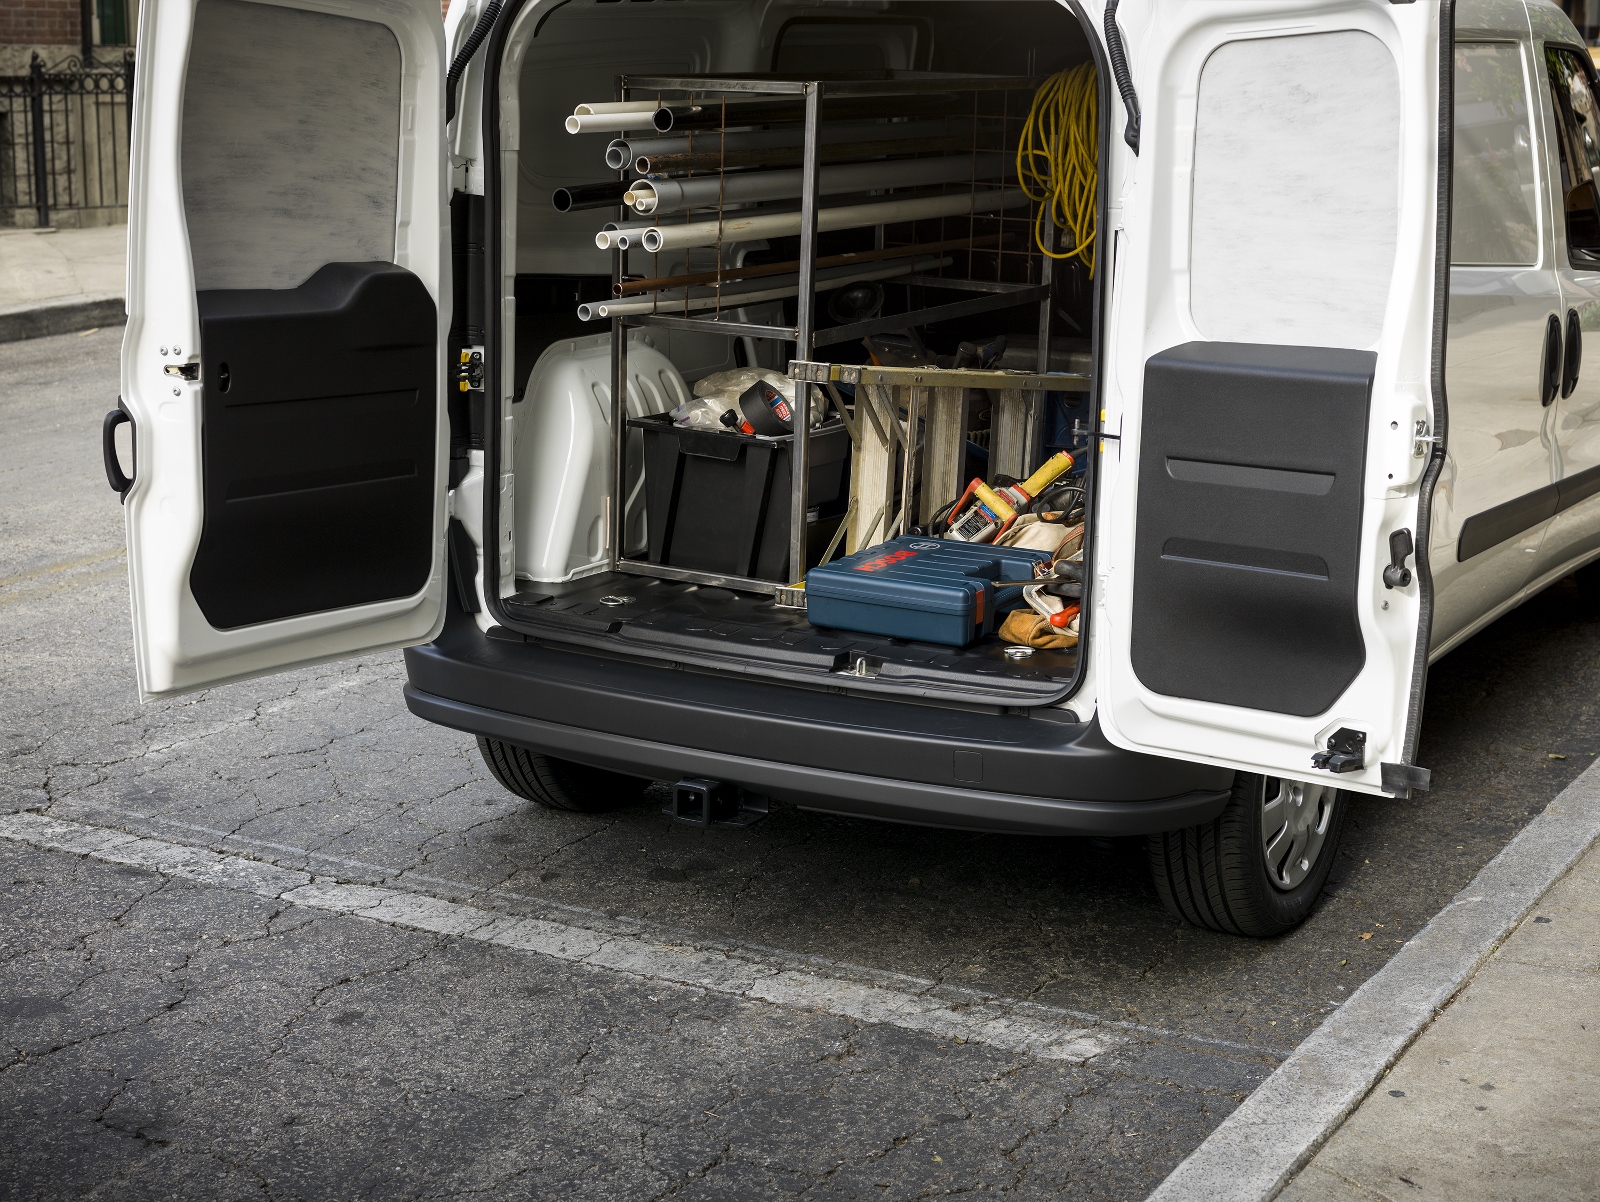 Ram Announces Pricing and Fuel Economy for its 2015 ProMaster City Lineup